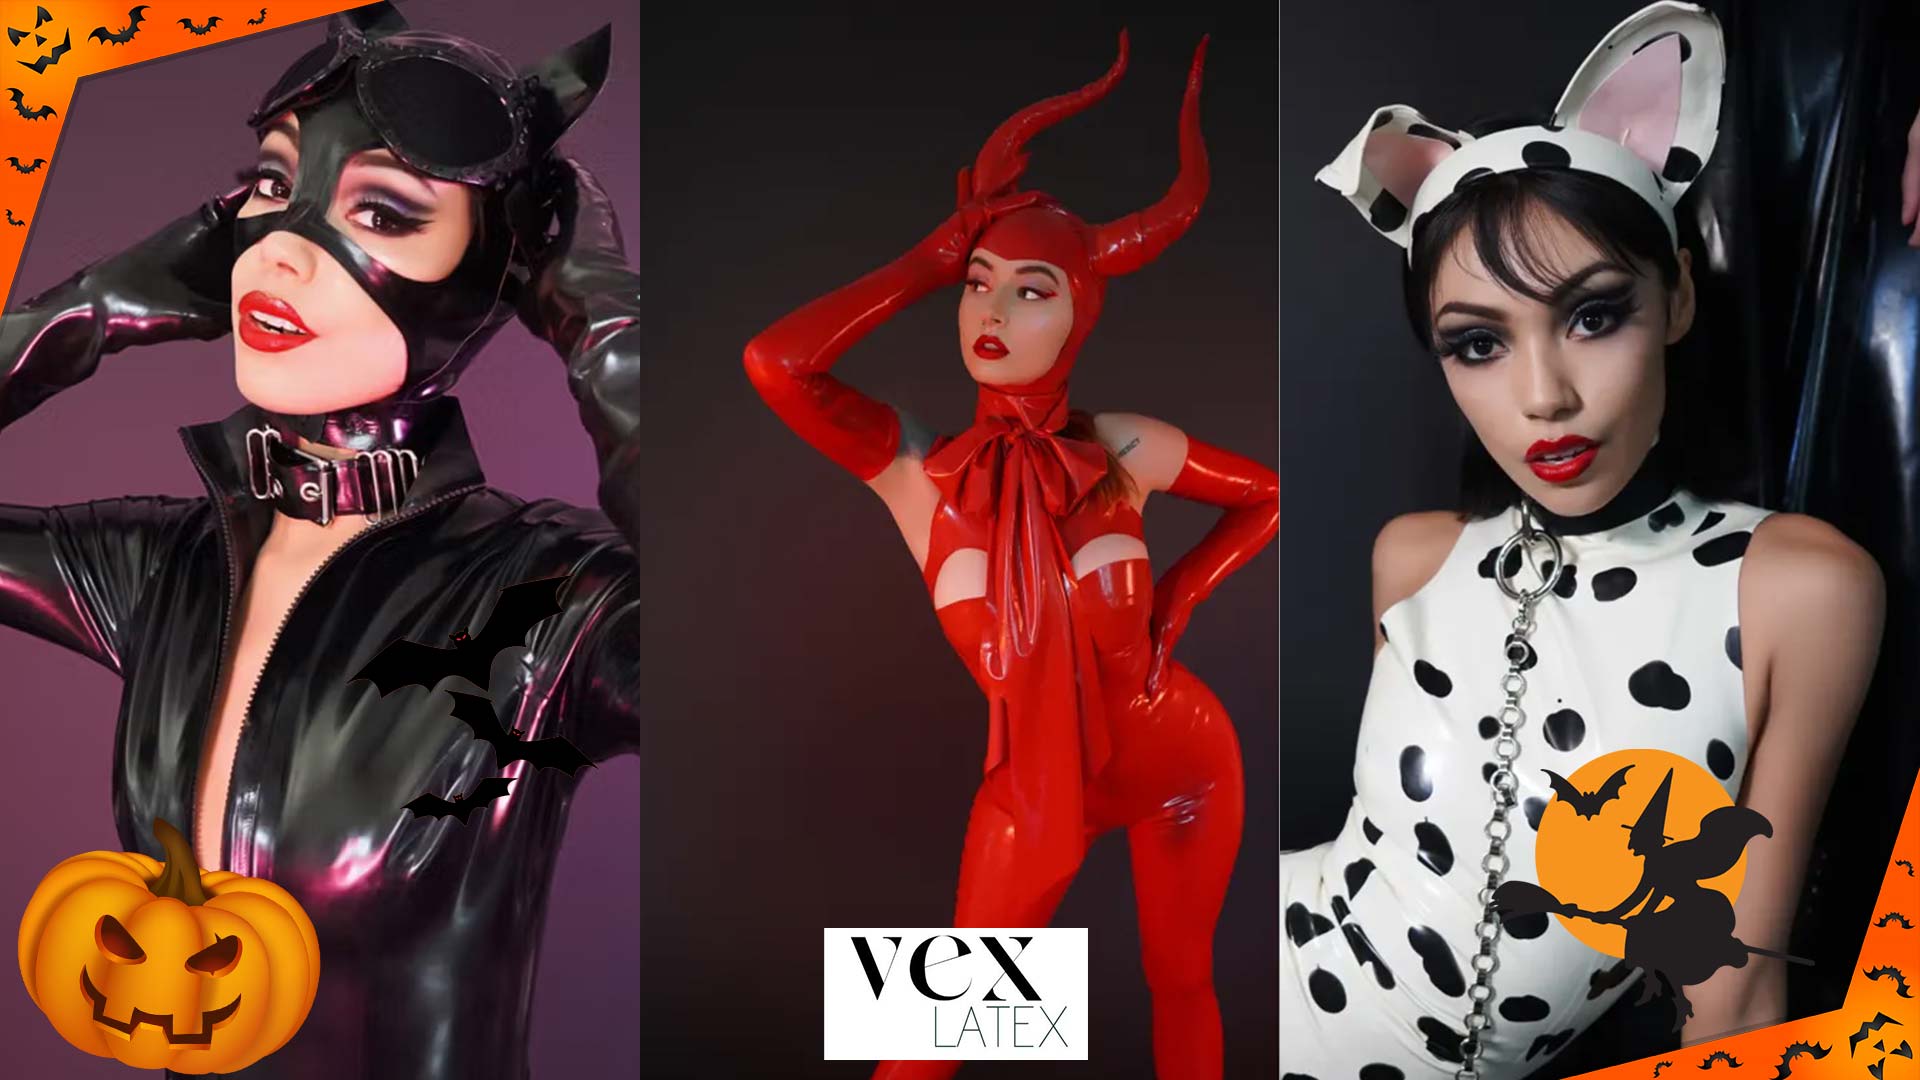 Get Ready For Halloween with Vex - Latex24/7